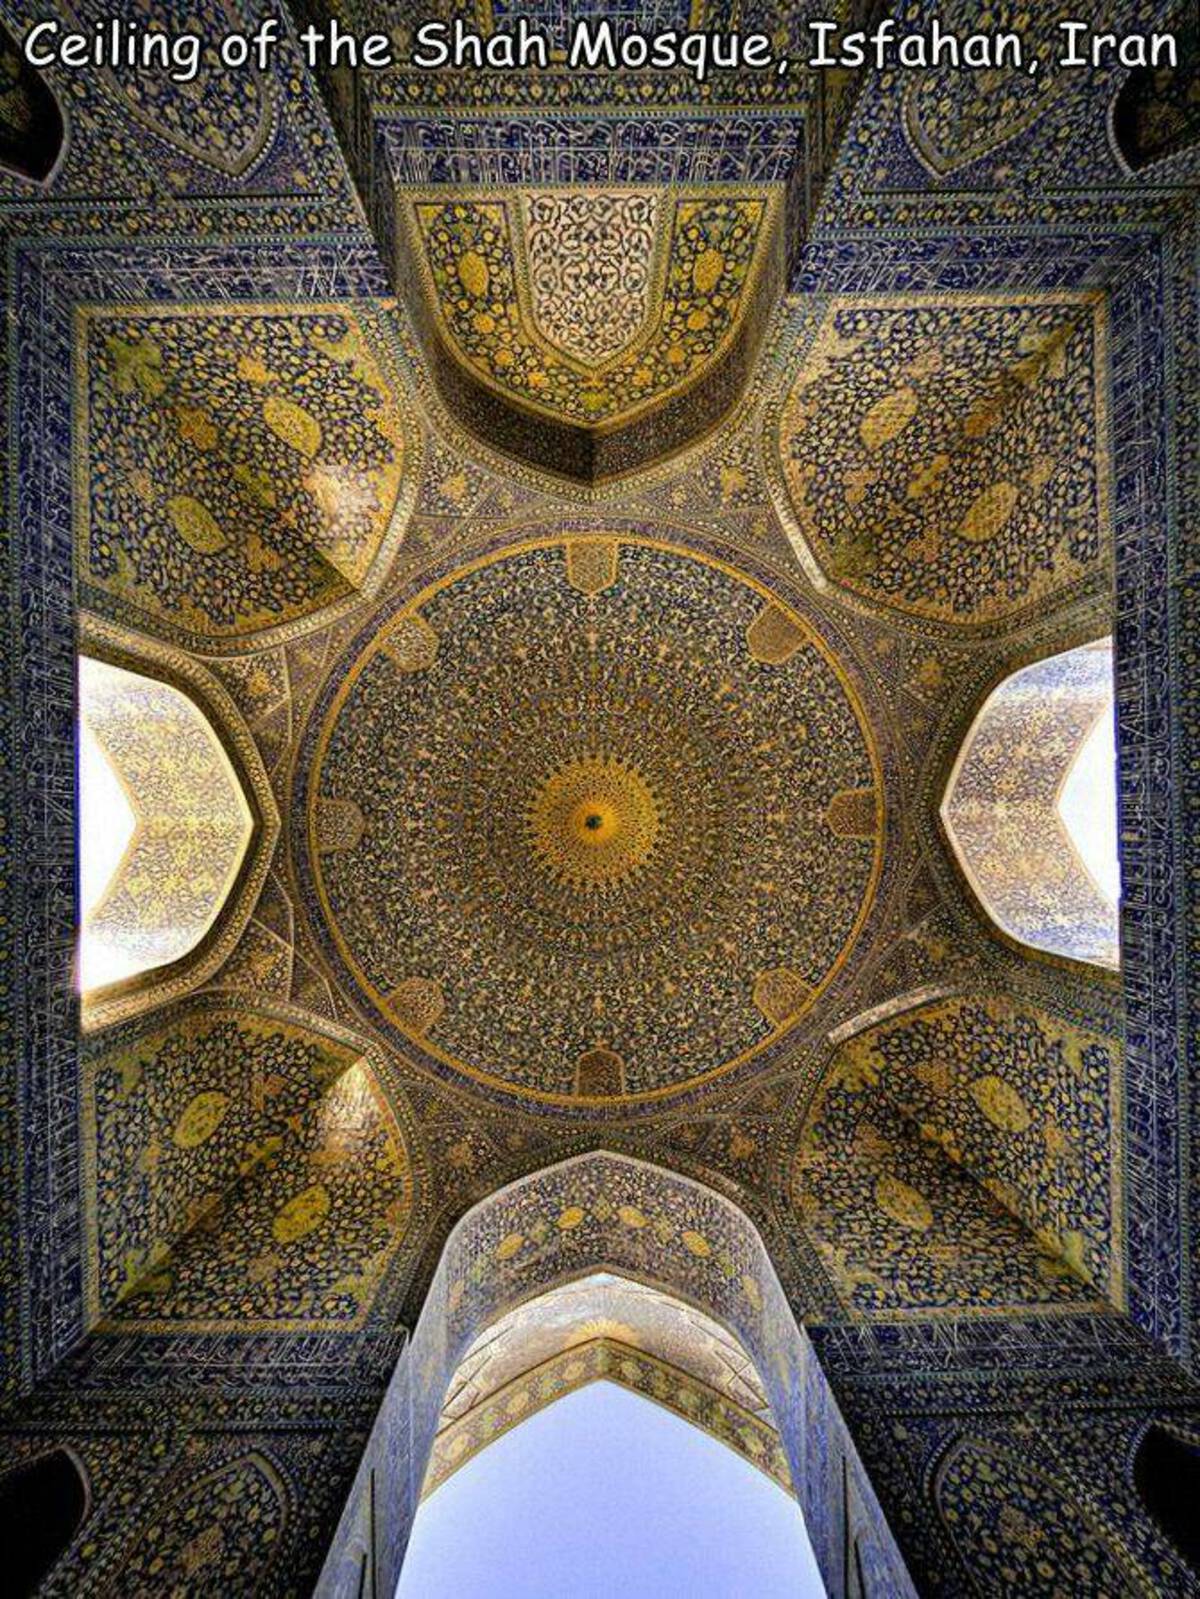 islamic architecture - Ceiling of the Shah Mosque, Isfahan, Iran